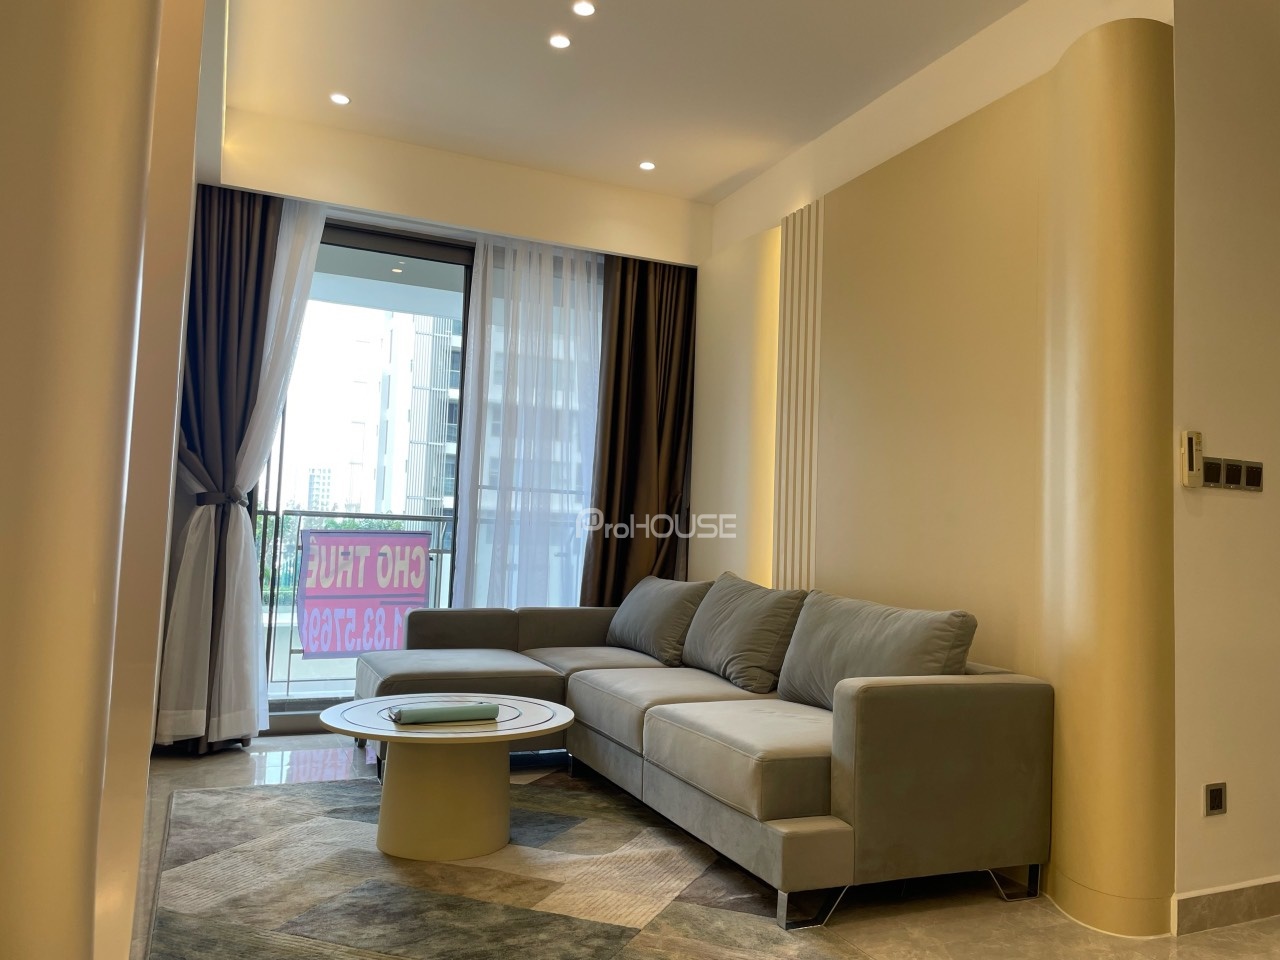 Modern 3-bedroom apartment for rent in The Peak with full amenities